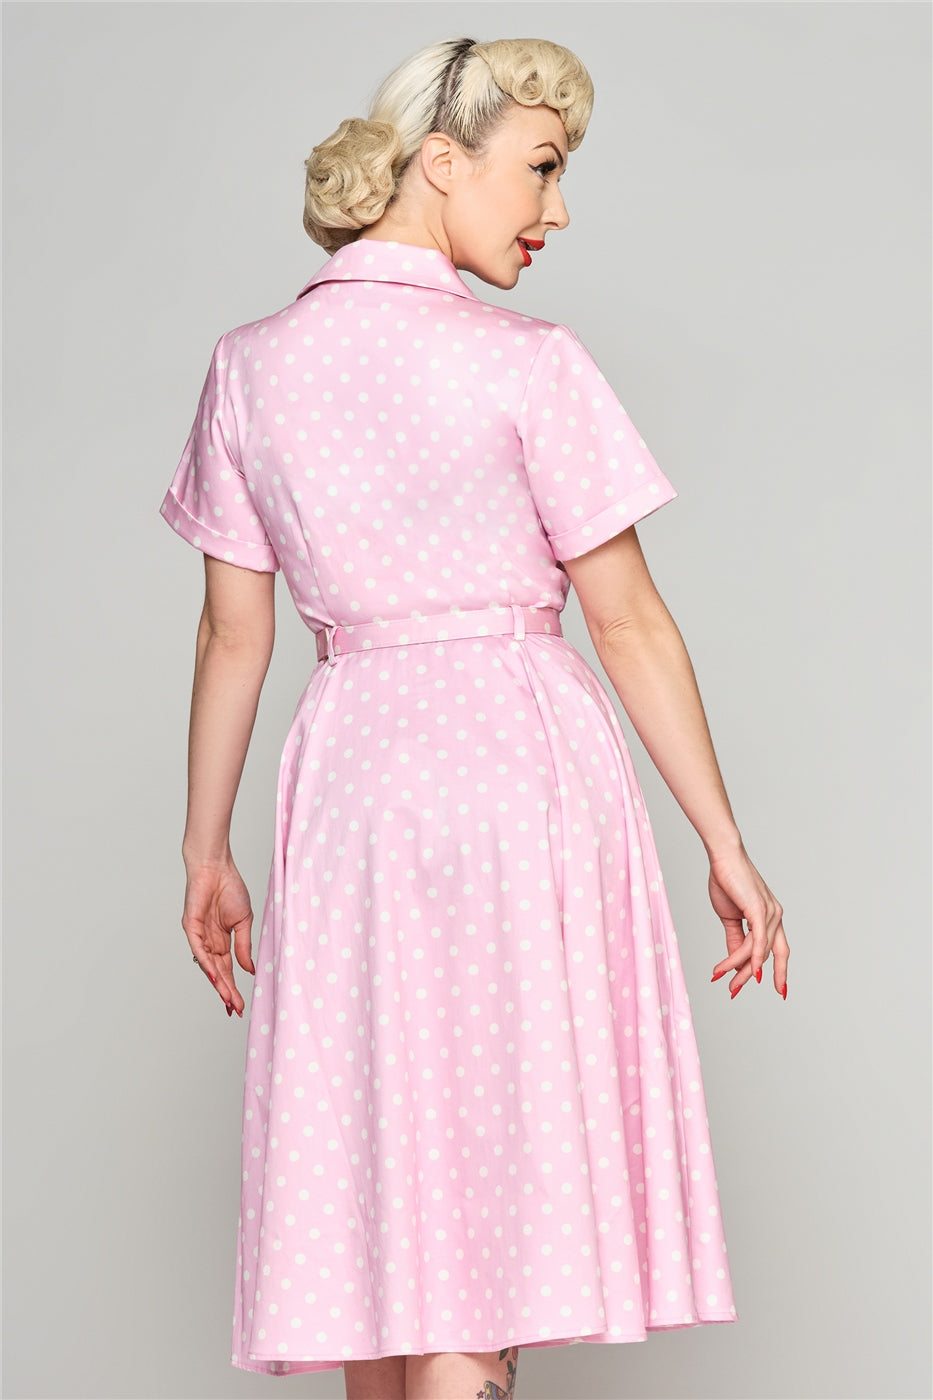 Pretty blonde woman wearing an elegant short sleeved pink and white polka dot shirt dress with a matching belt.